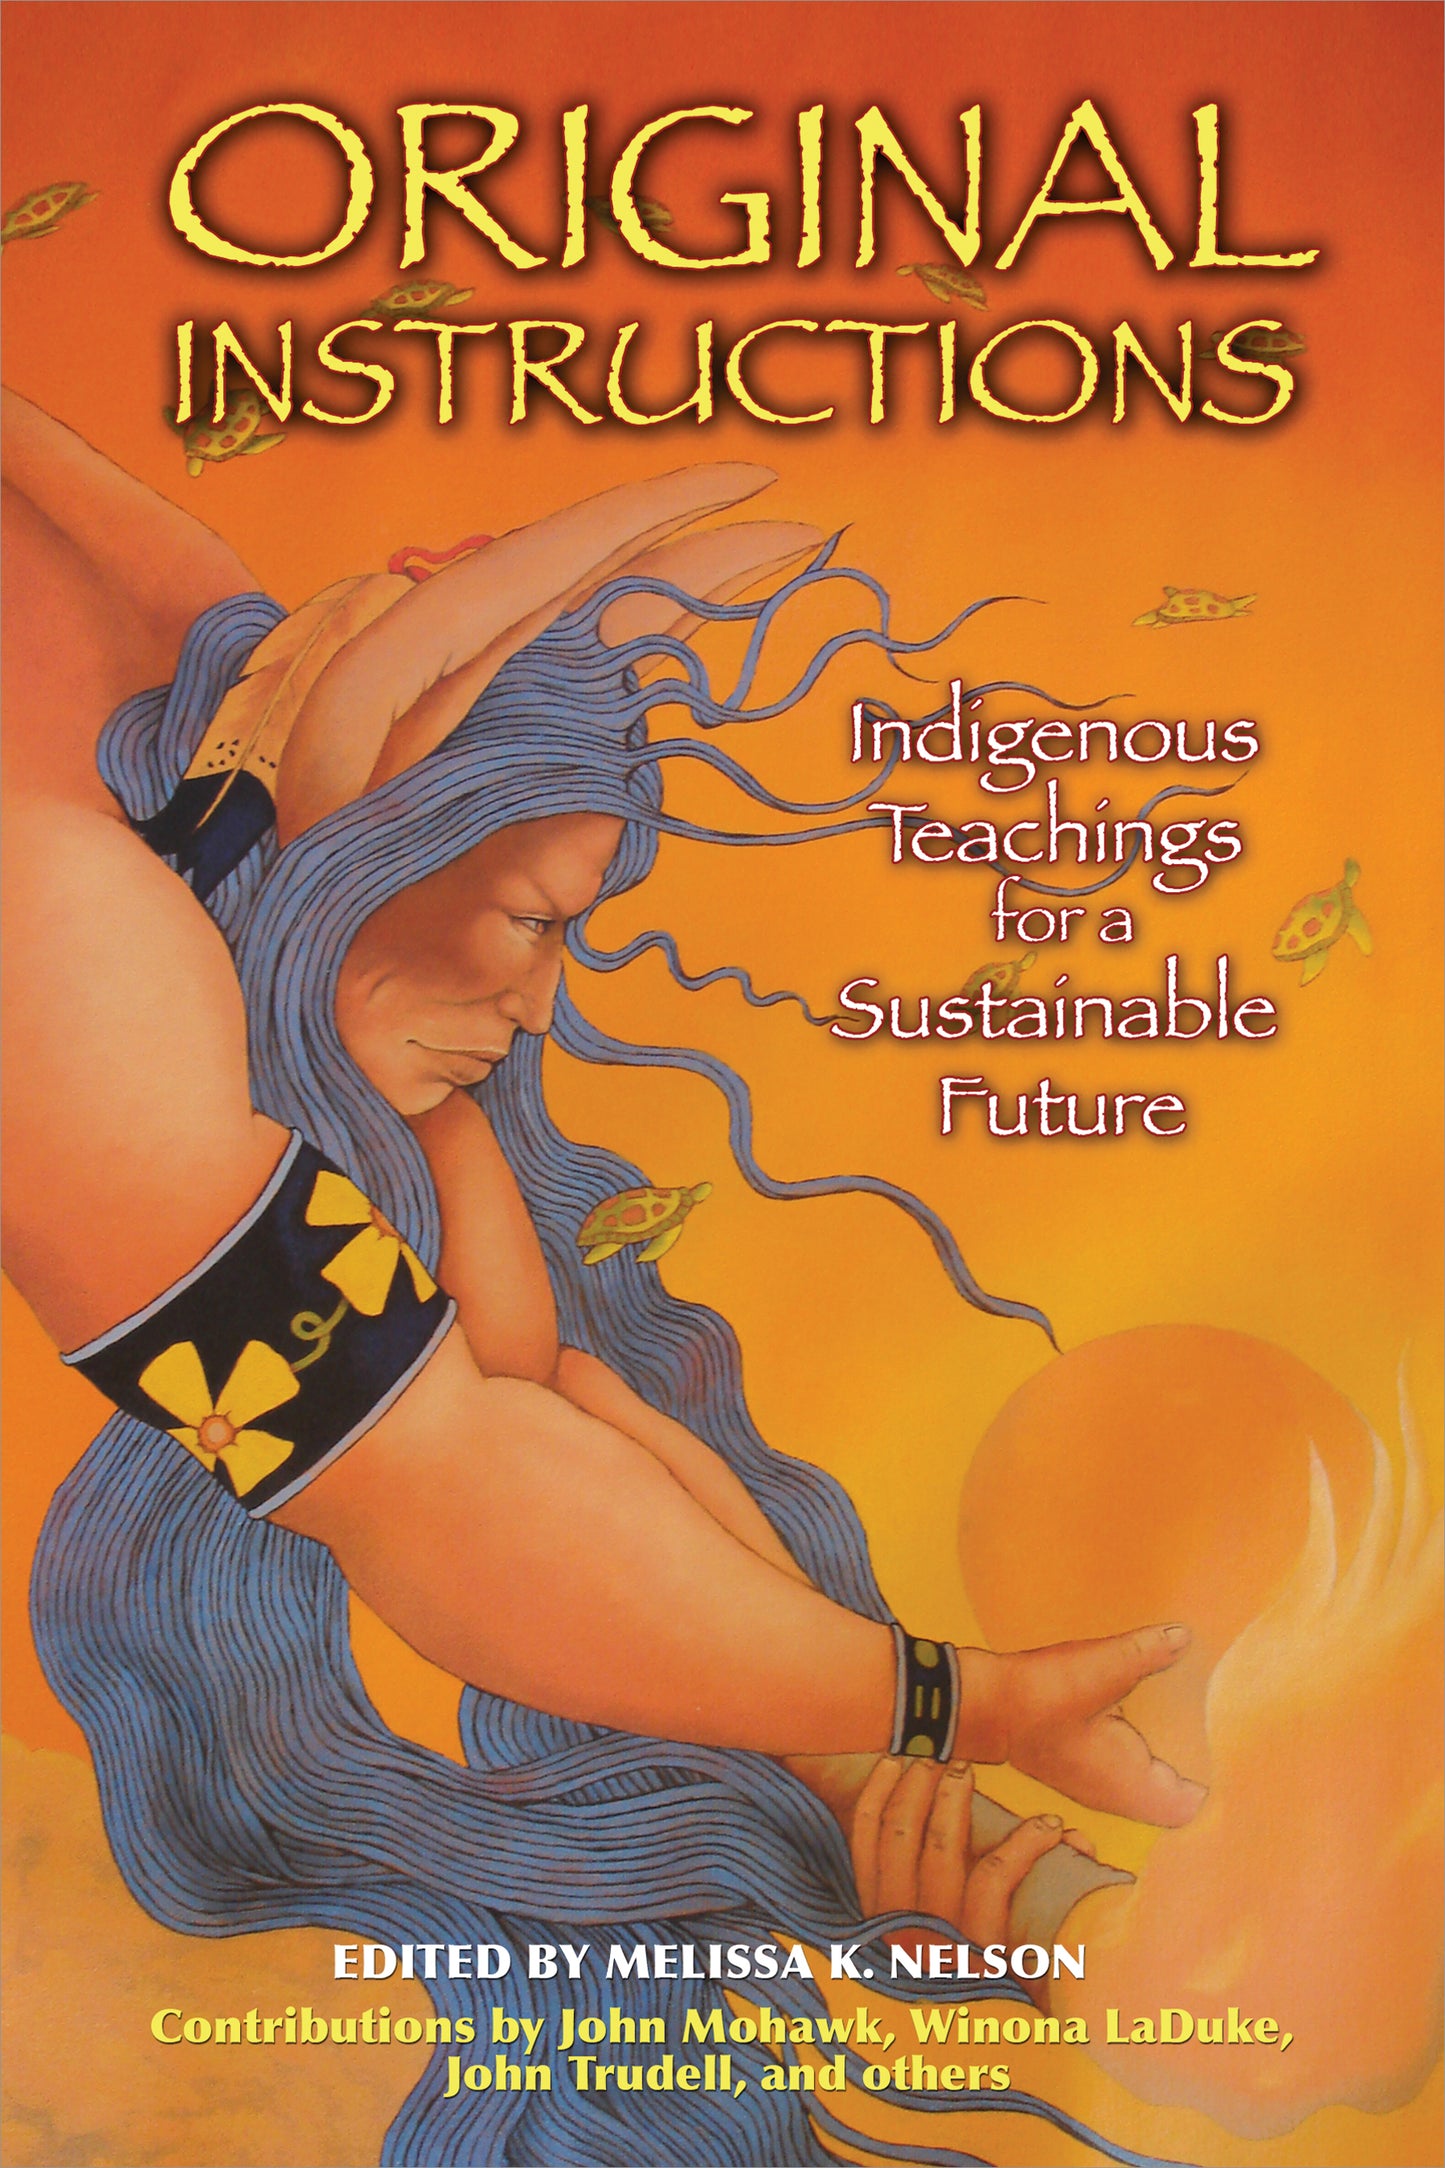 Cover of Original Instructions, edited by Melissa K. Nelson